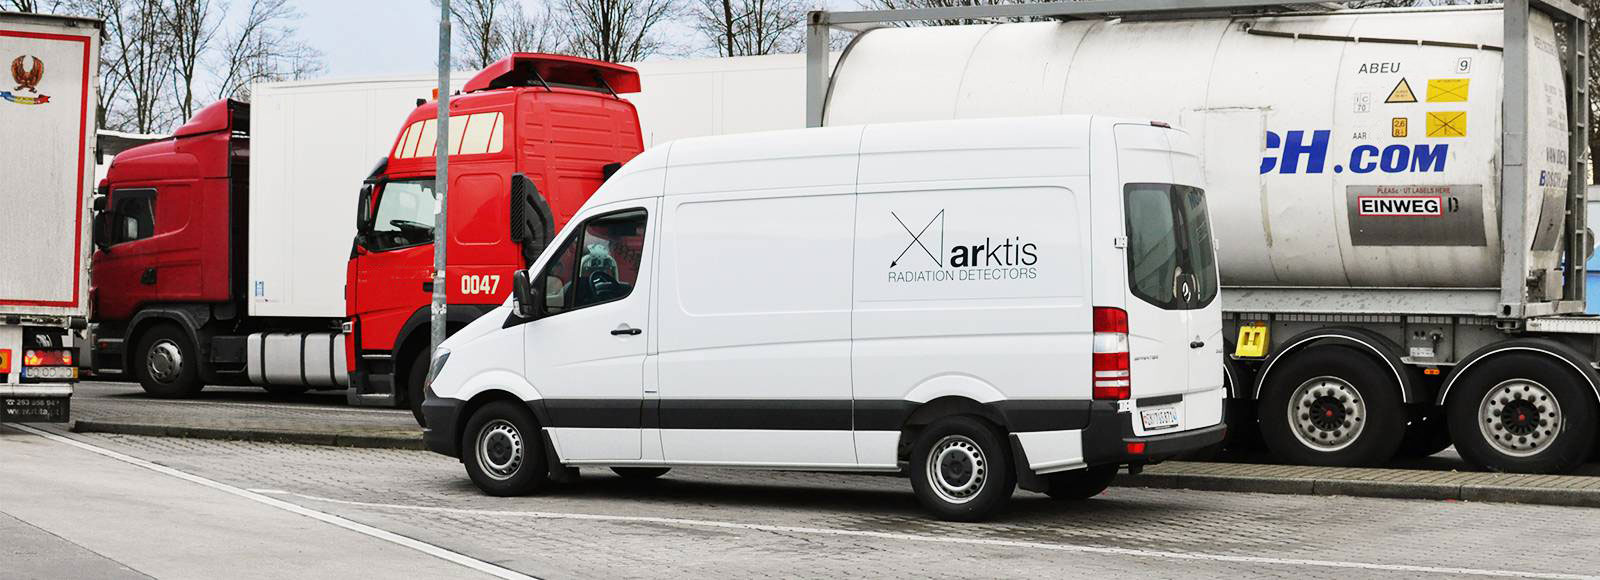 Arktis Mobile Radiation Monitoring and Detection System